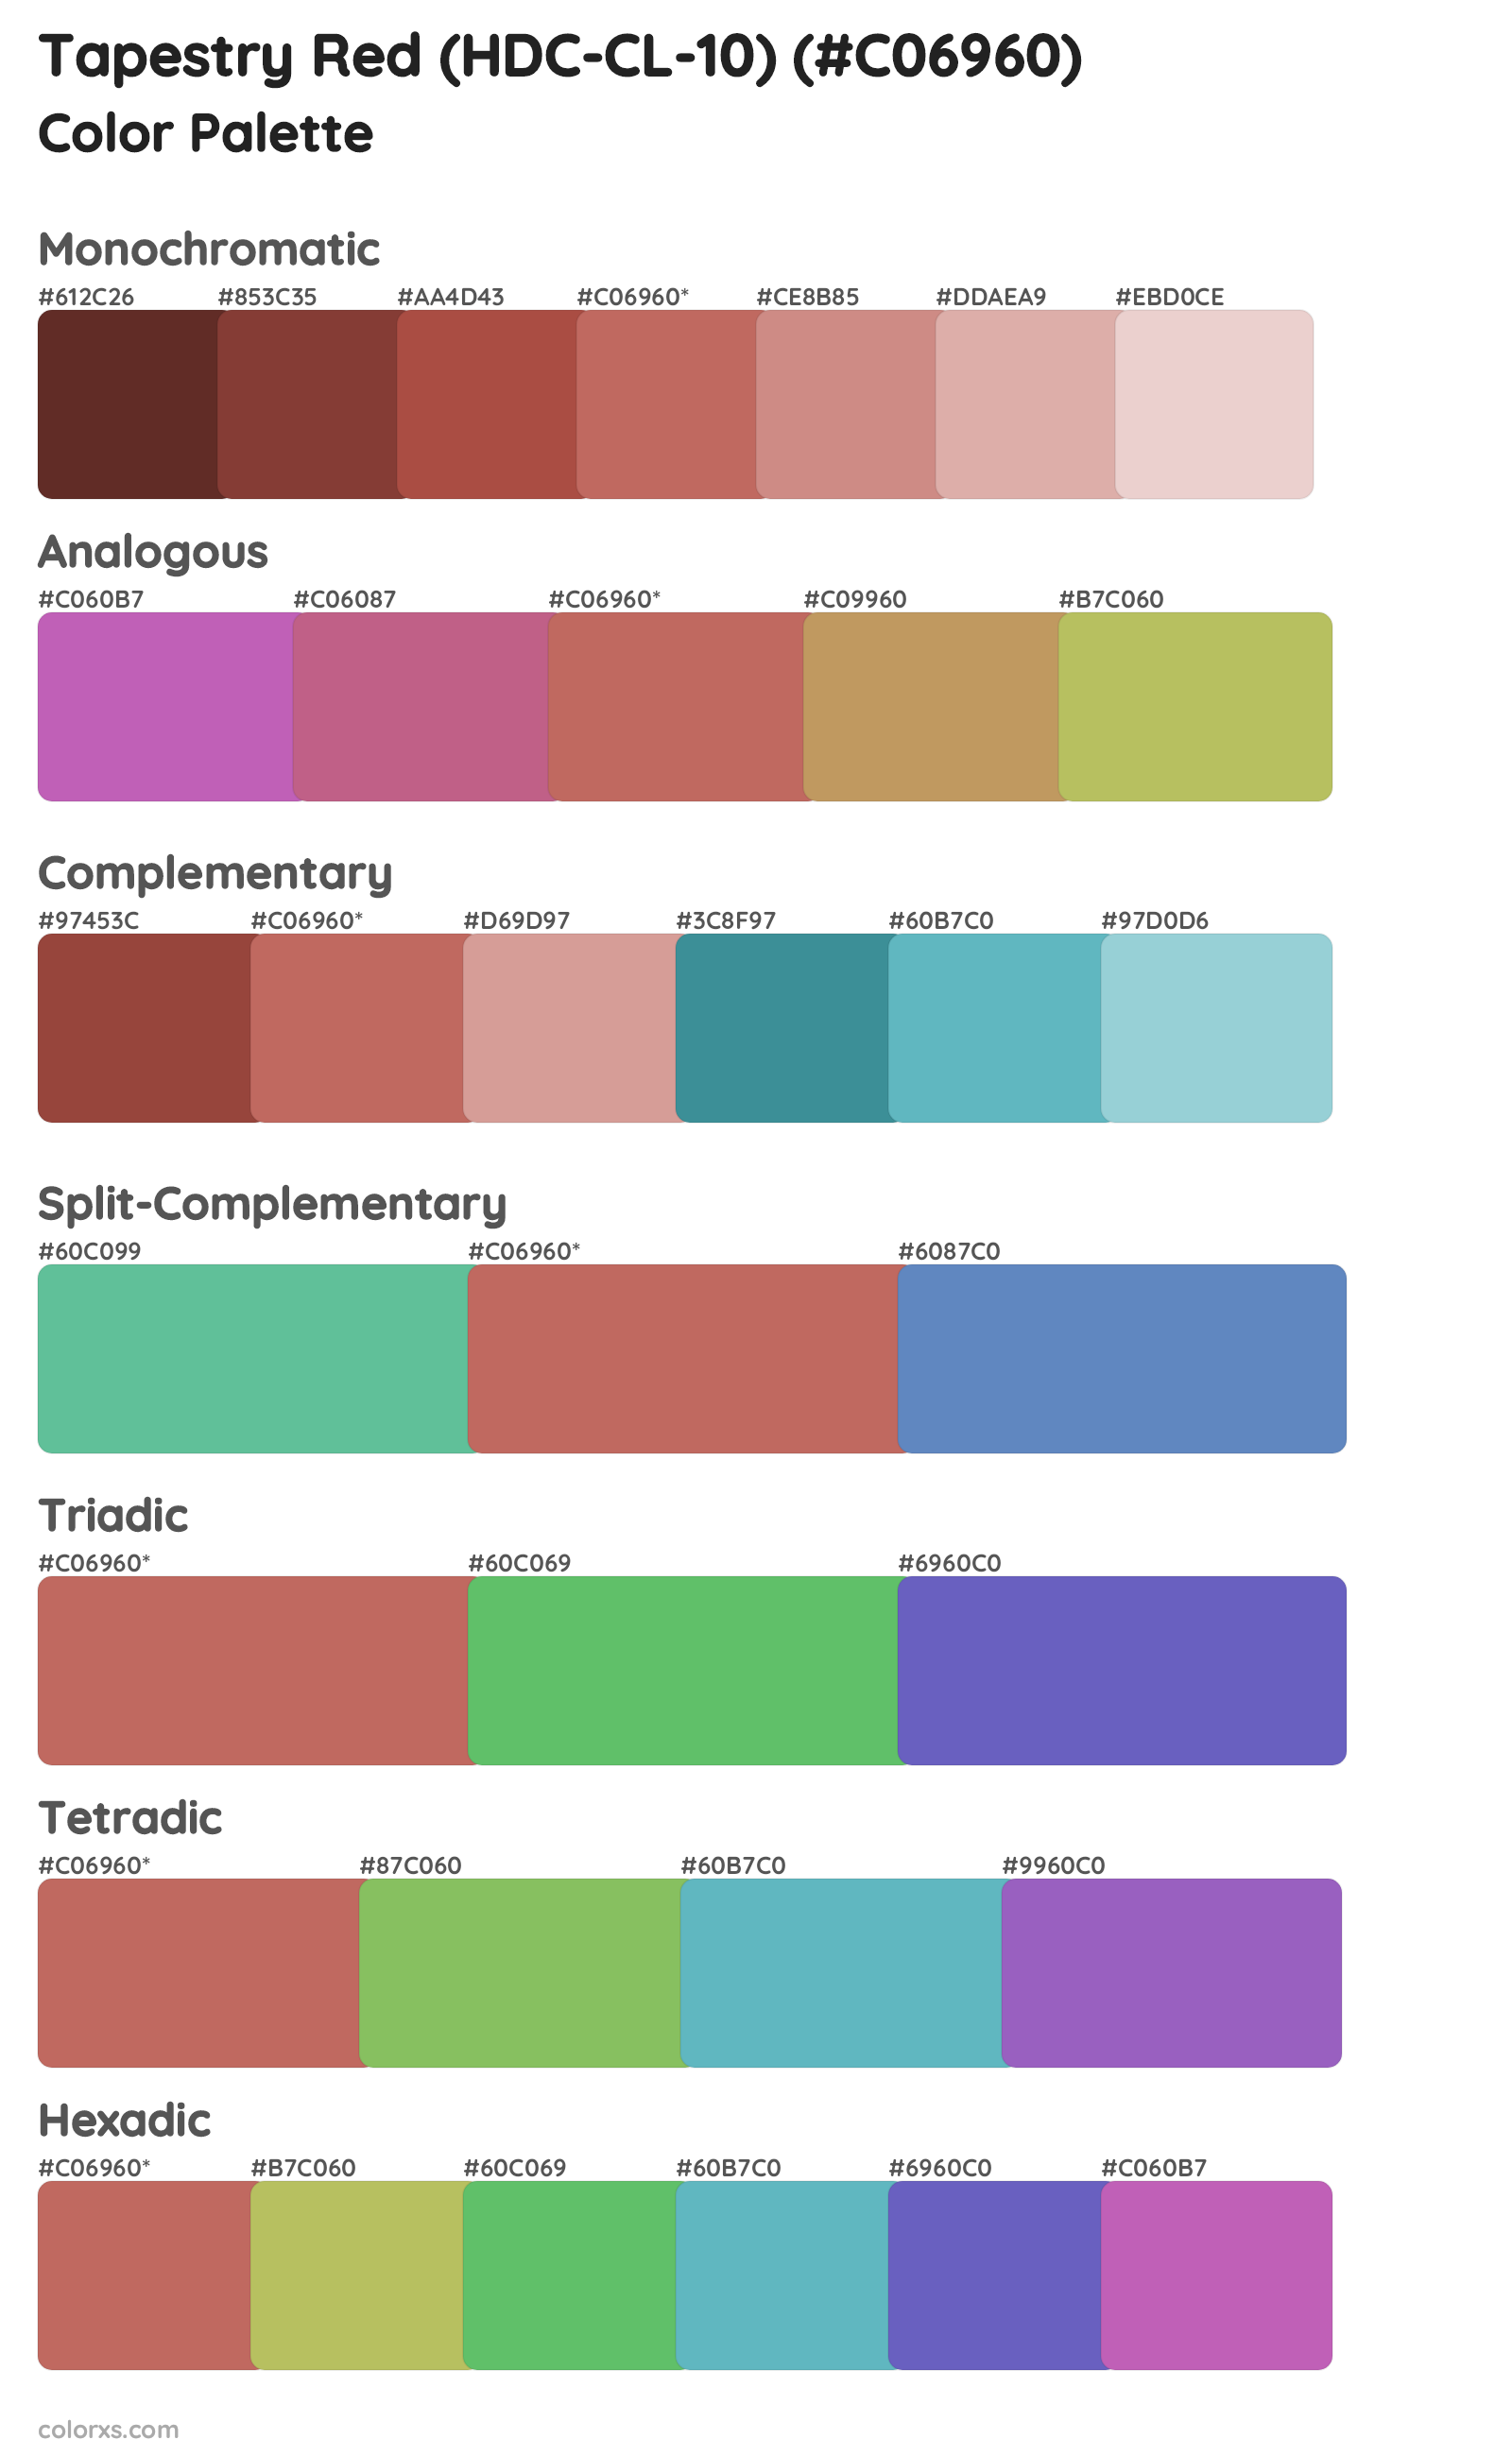 Tapestry Red (HDC-CL-10) Color Scheme Palettes